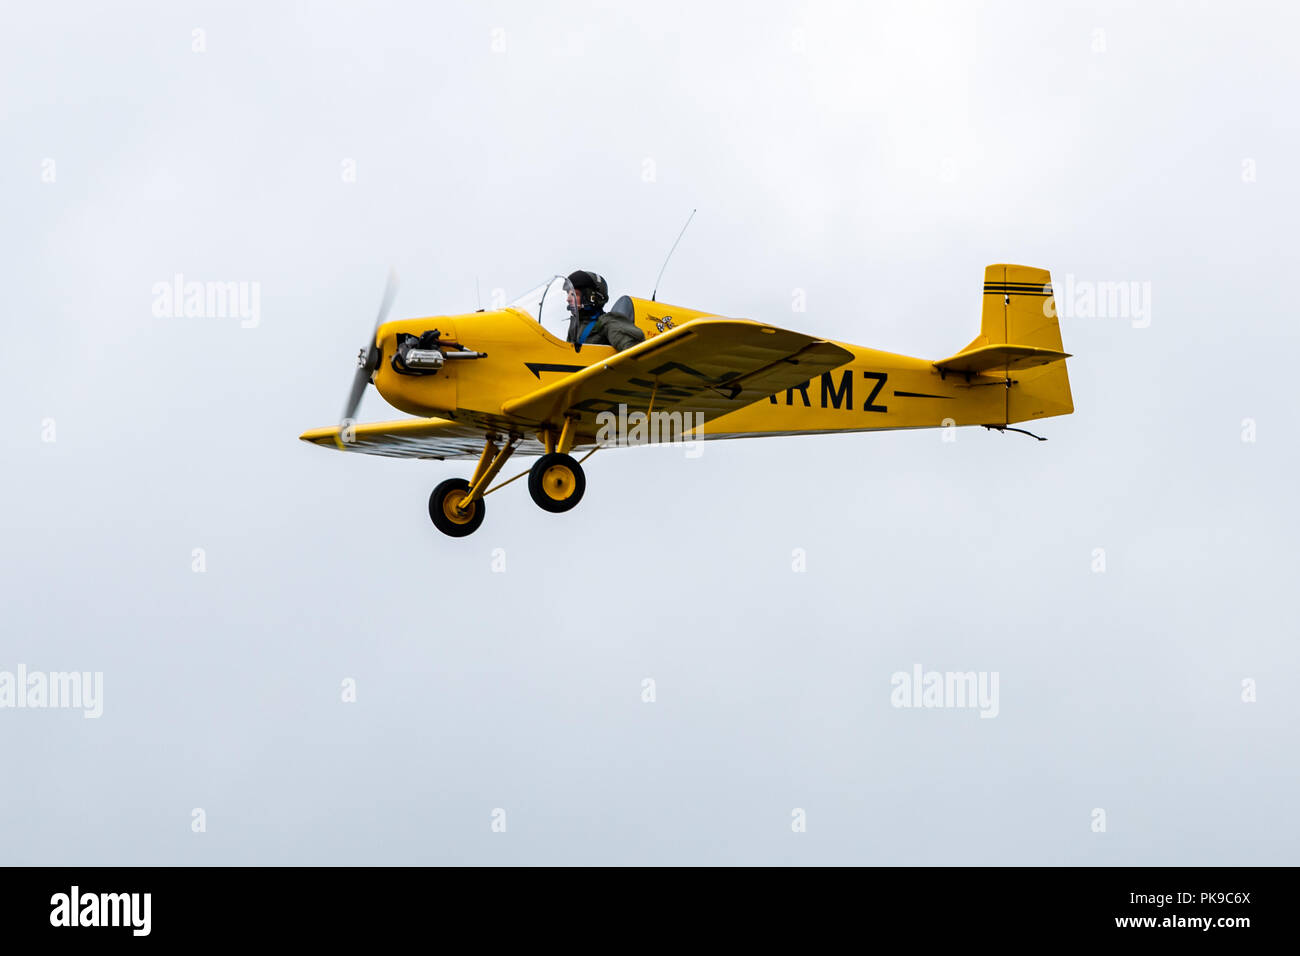 A bright yellow Tiger Club D31 Turbulent single seater in level flight during an air display Stock Photo